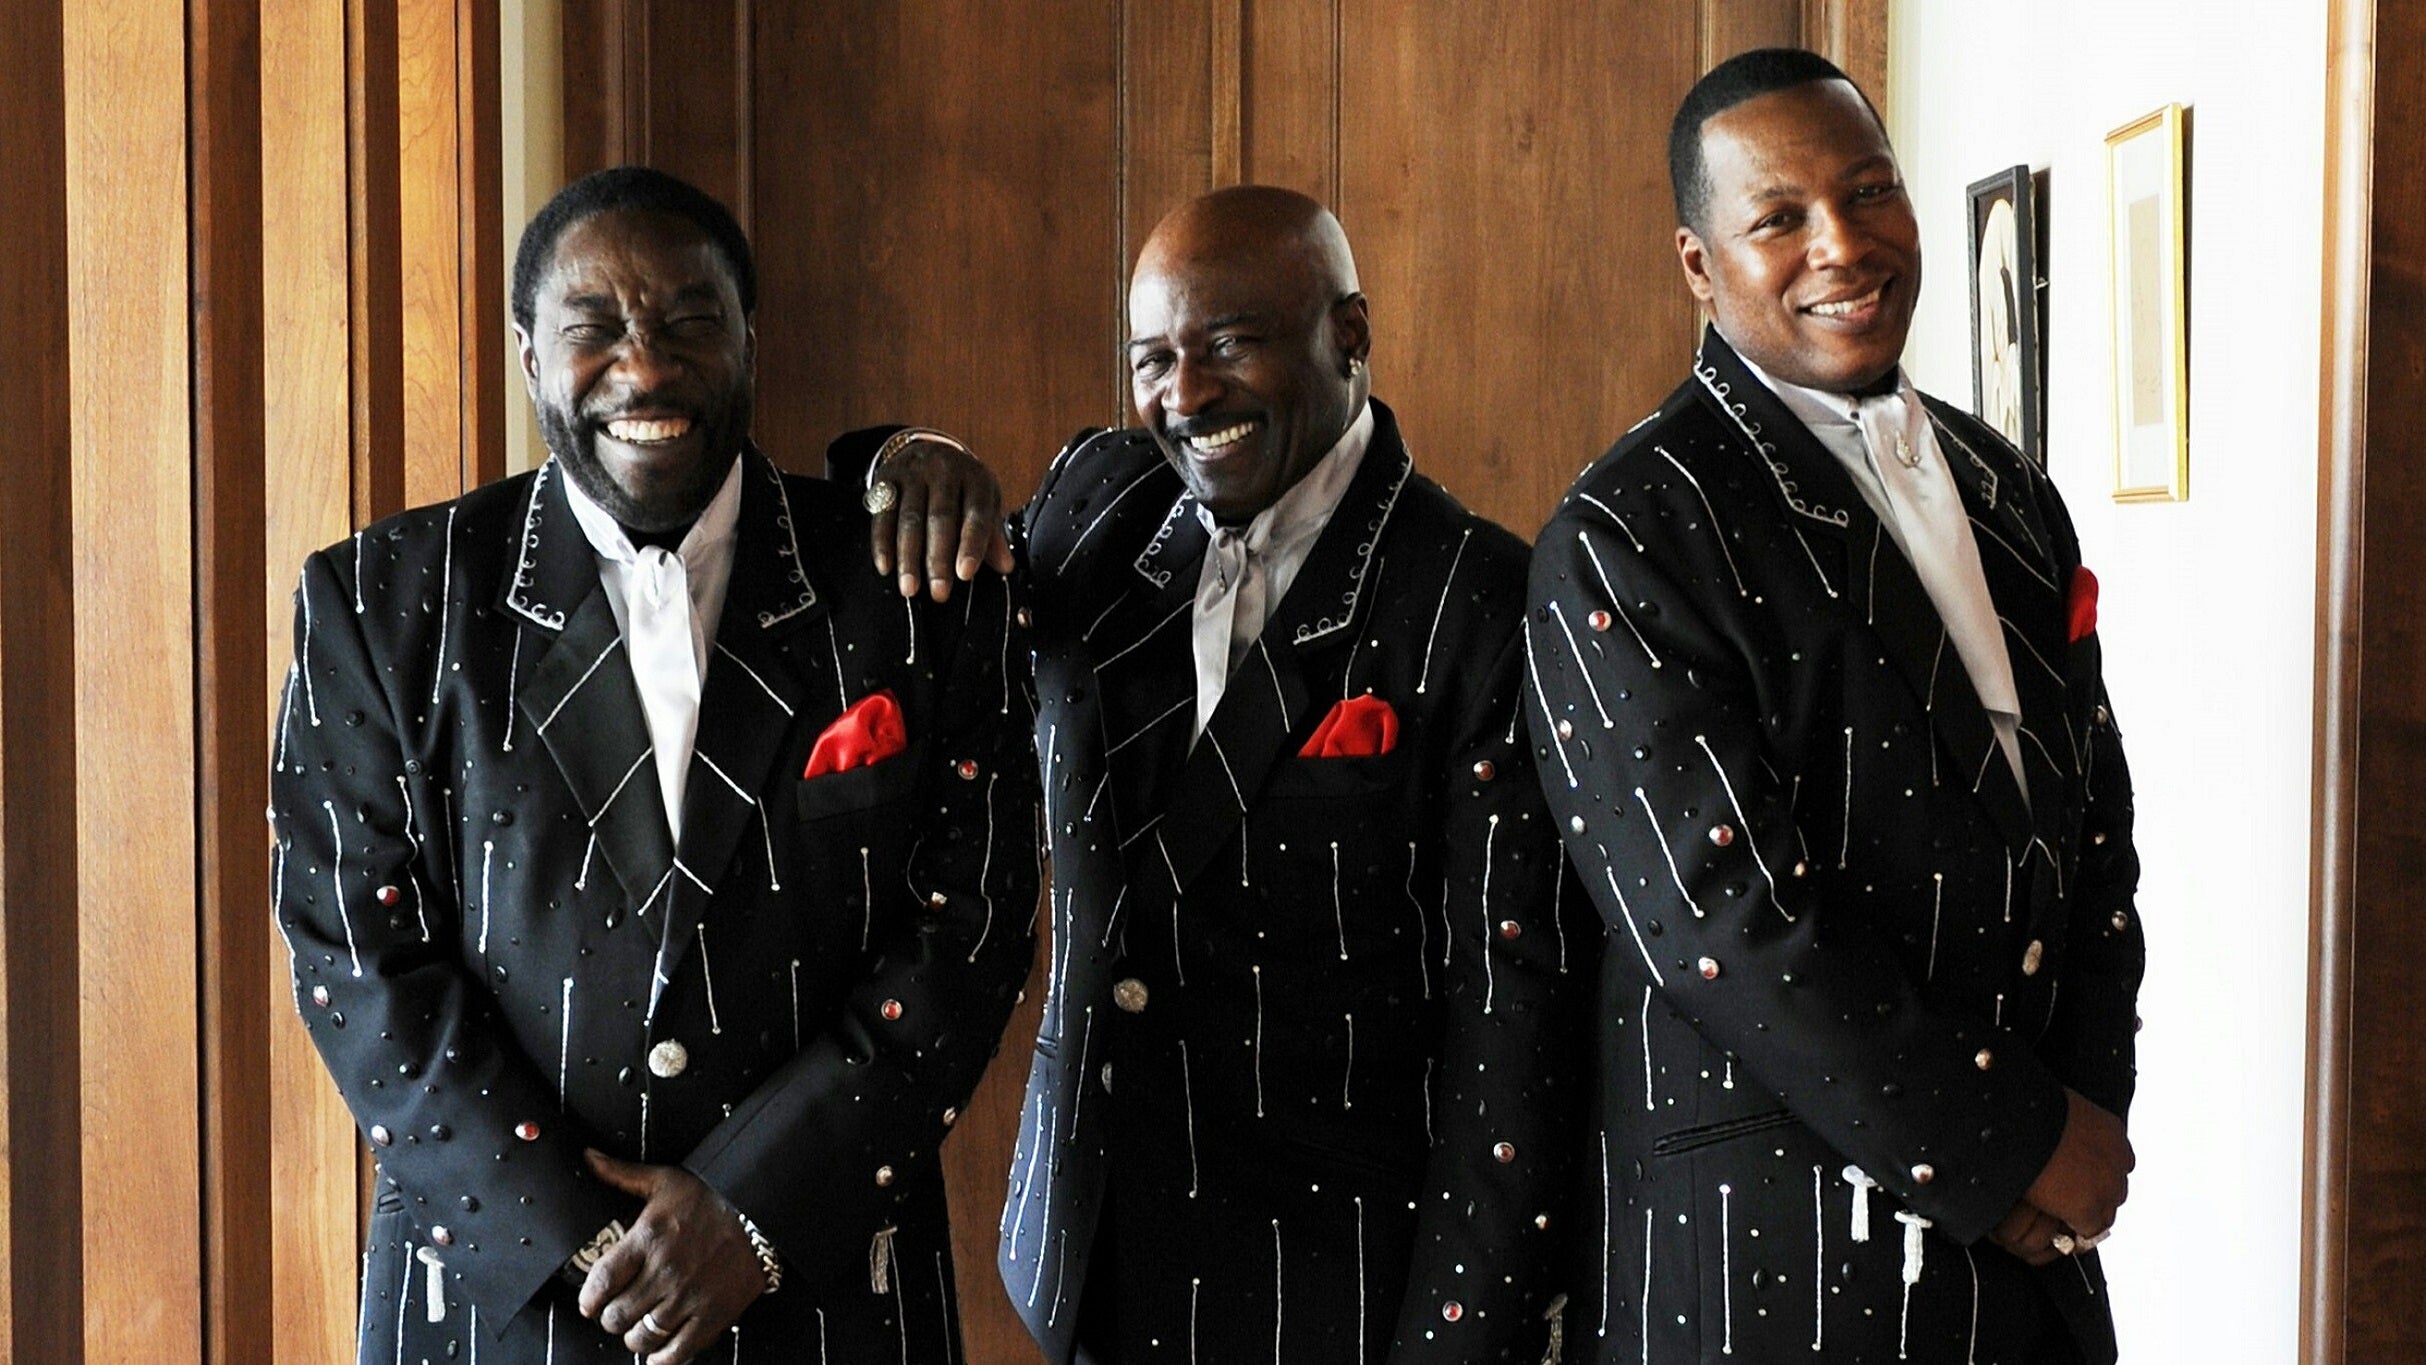 The O'Jays in National Harbor  promo photo for VIP Package presale offer code